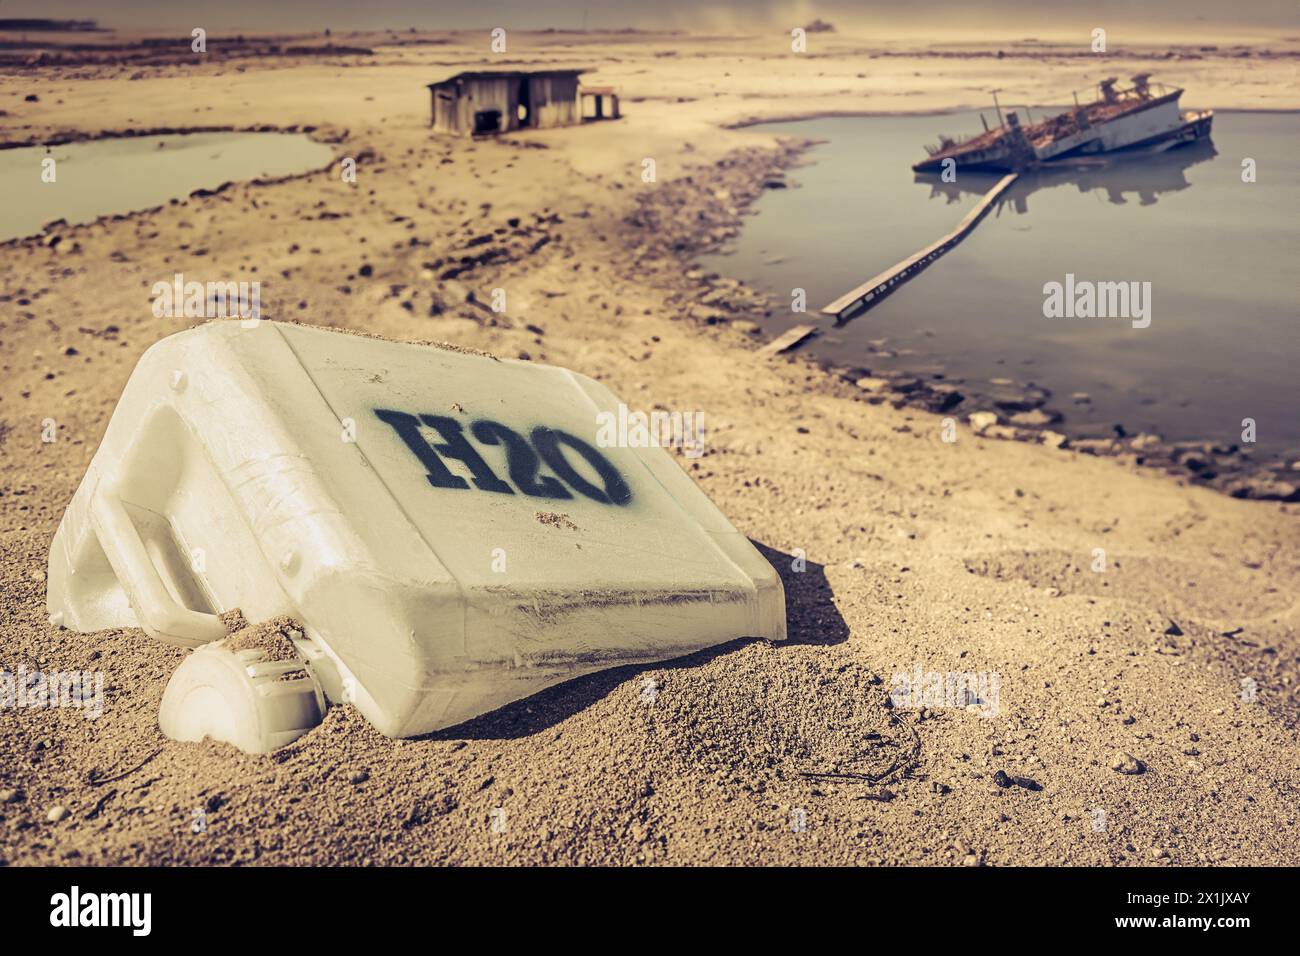 Unclean water cans in desolate and desert place. Empty plastic water cans in a desert area. Stock Photo